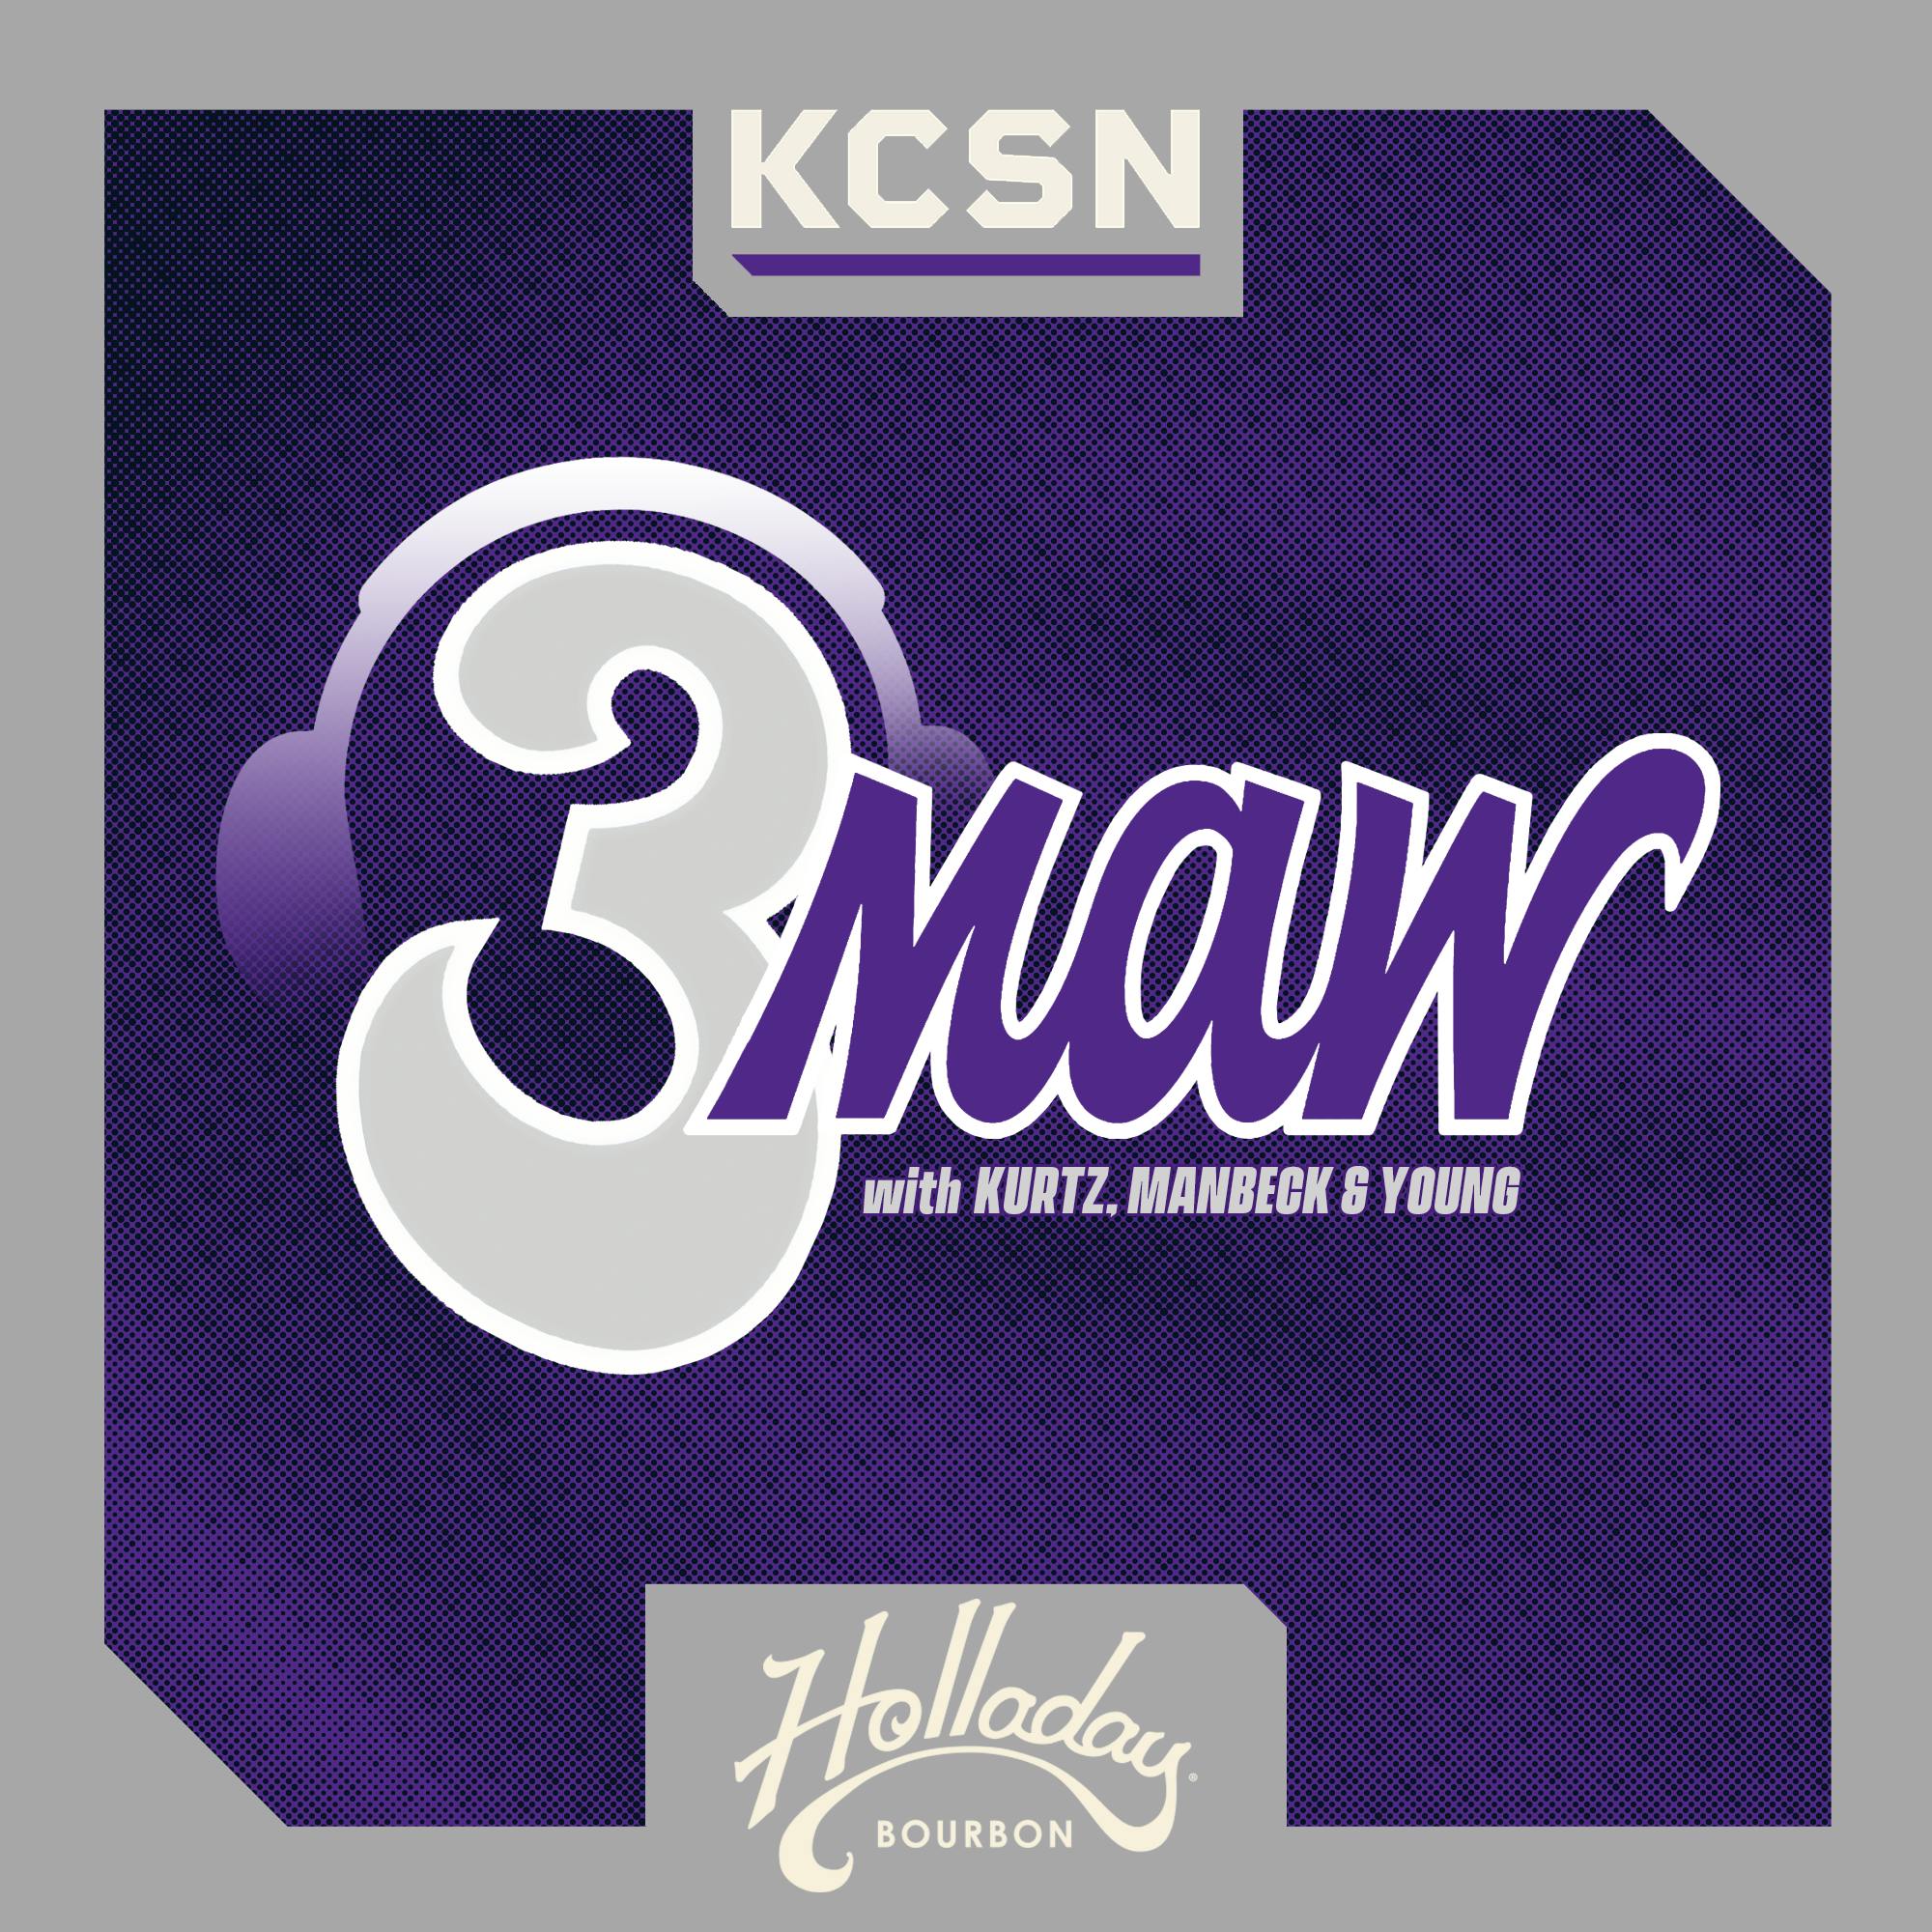 Jerome Tang Staying as Head Coach of K-State Basketball | 3MAW 4/6